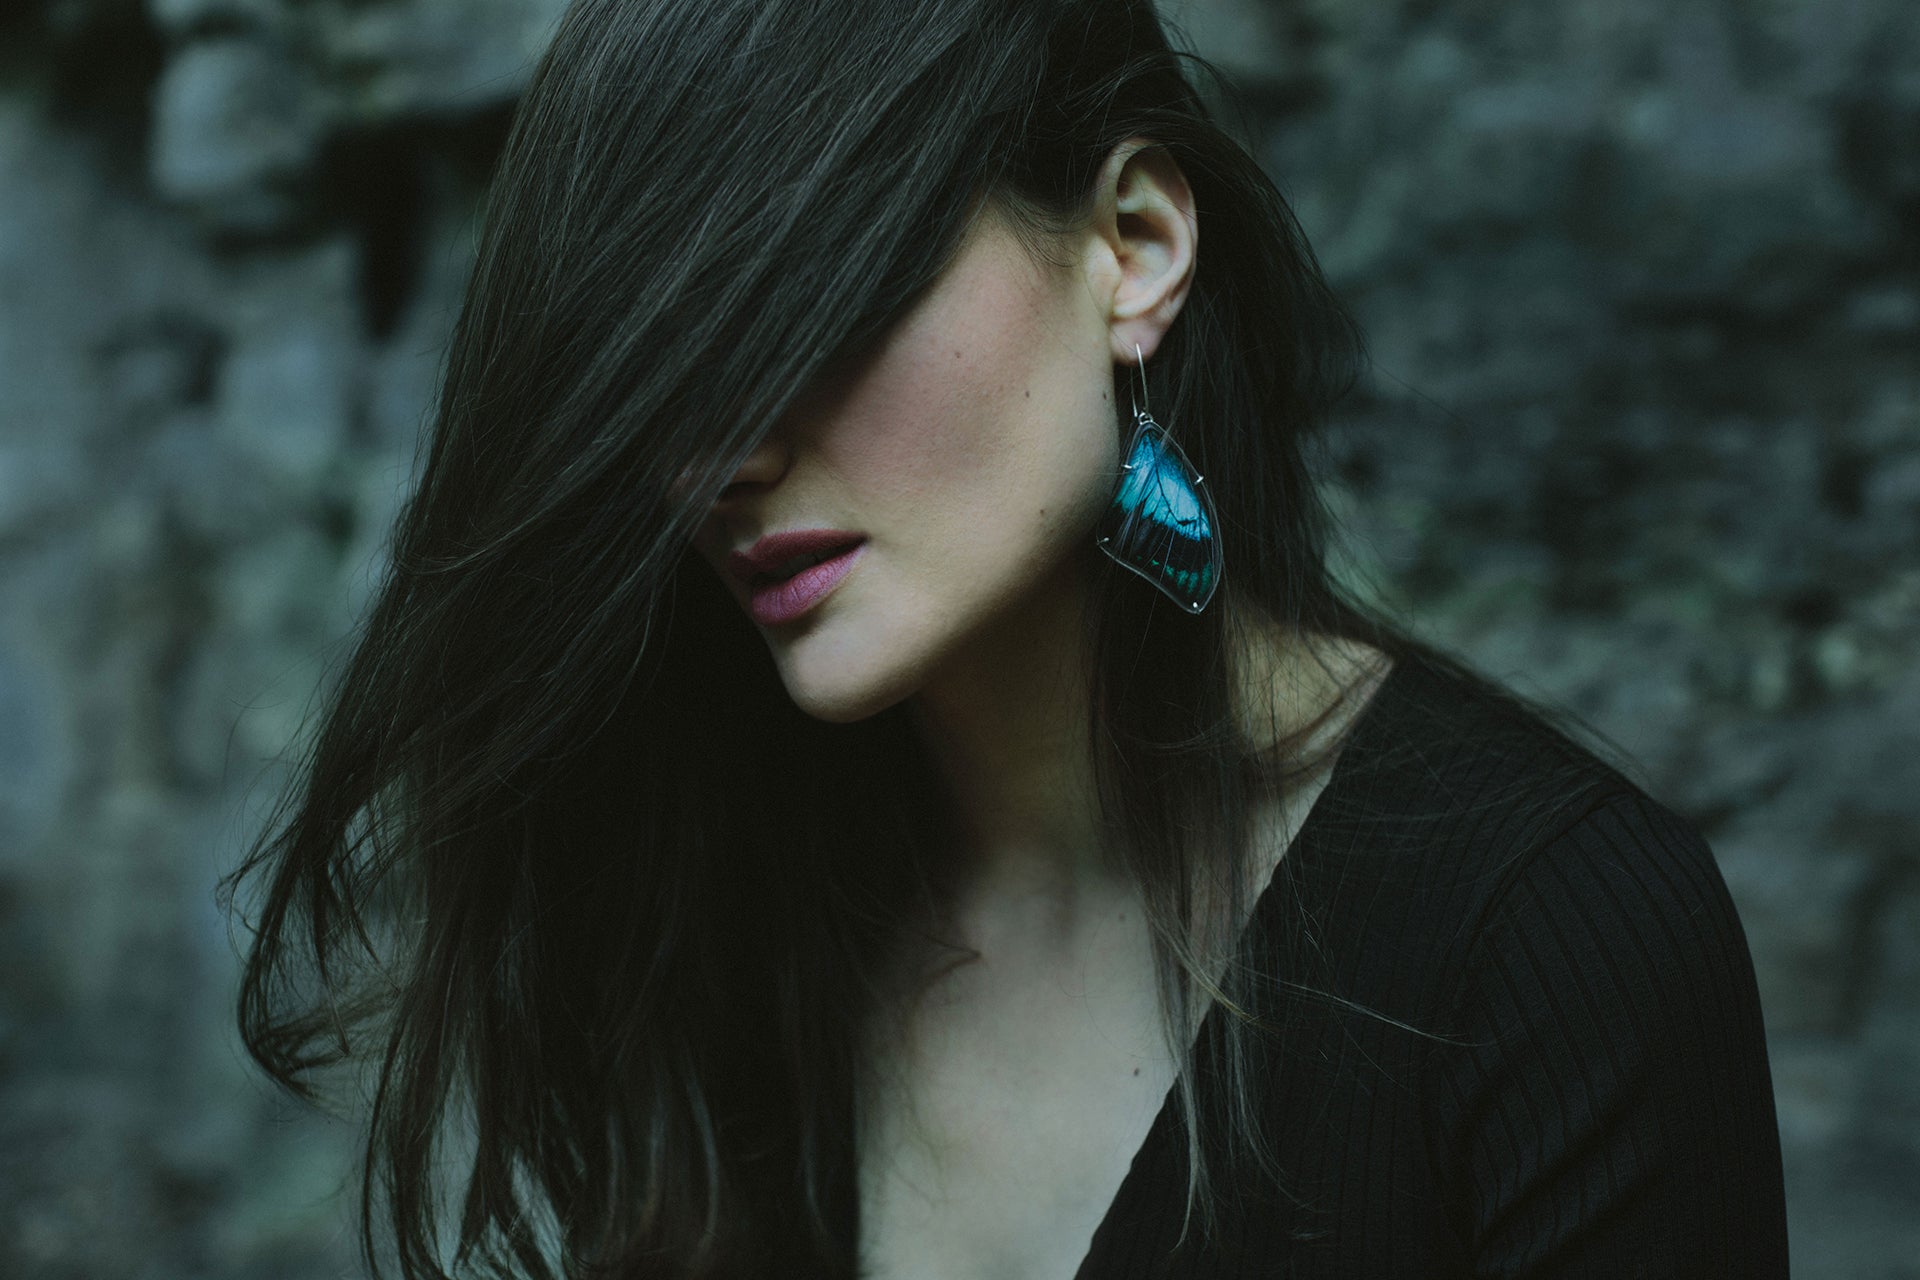 A woman with her dark hair swept over her face wears an aqua blue real butterfly wing earring. The image is dark and moody and set in front of a natural rock wall.